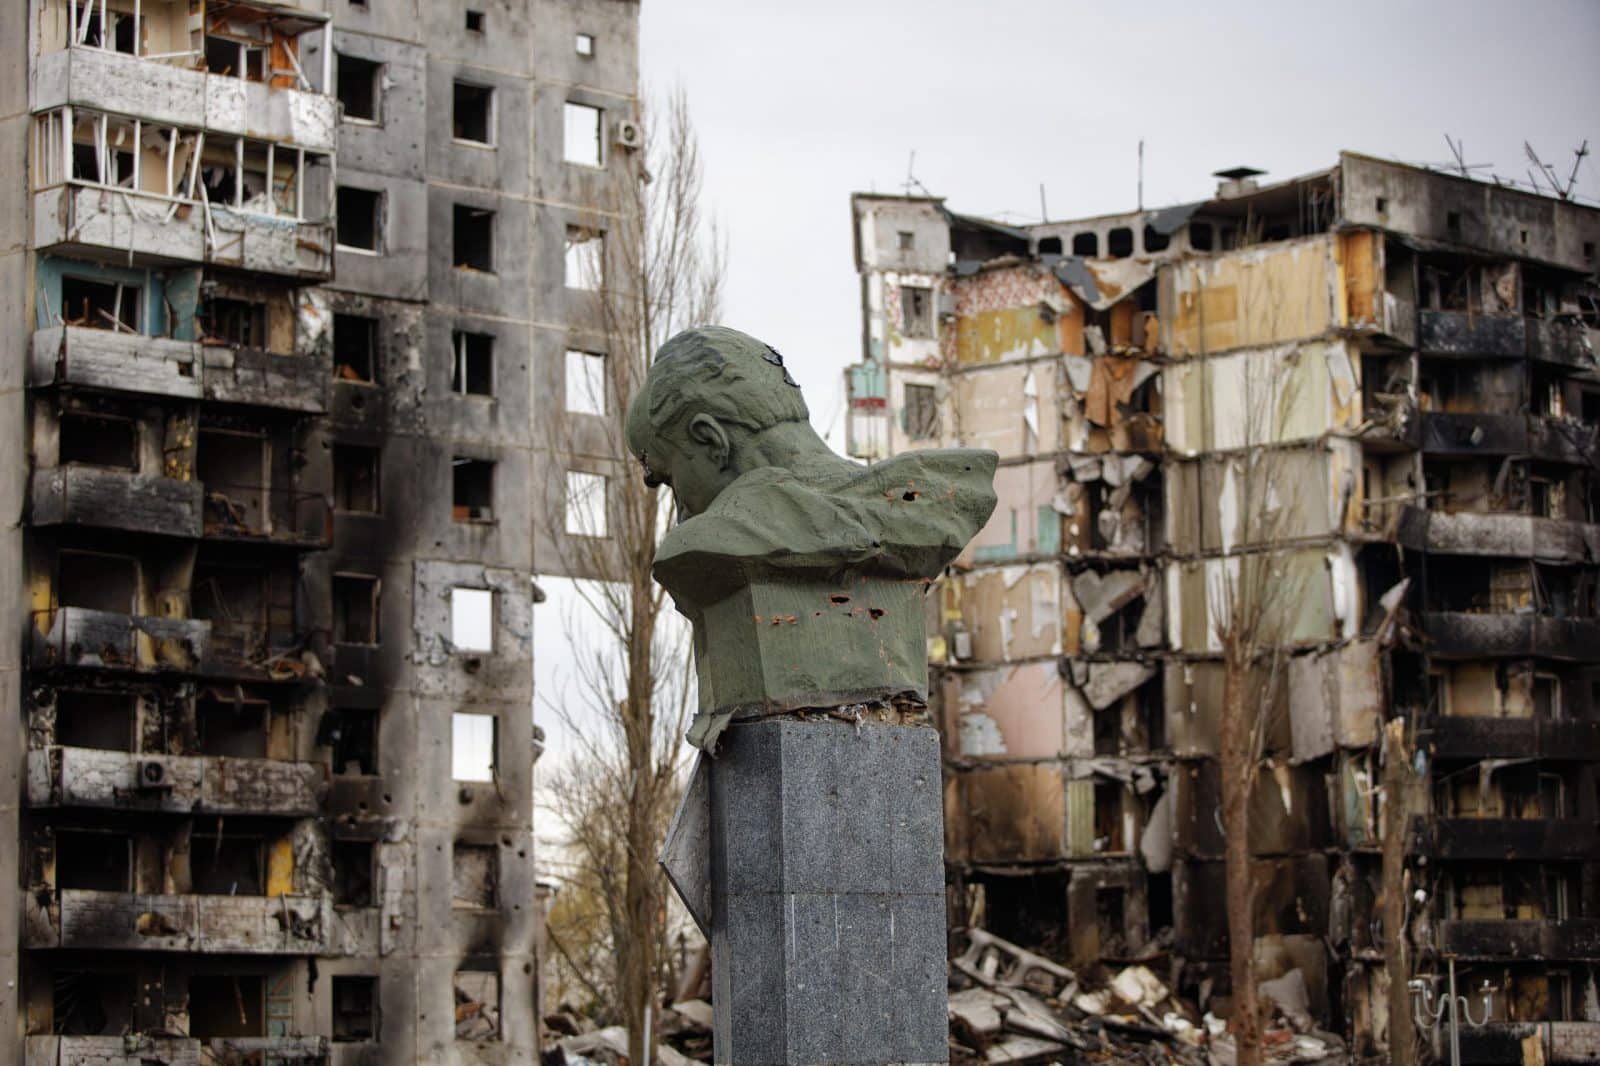 Do not rebuild blindly: what should Ukraine’s post-war recovery be like and what is the government doing wrong?